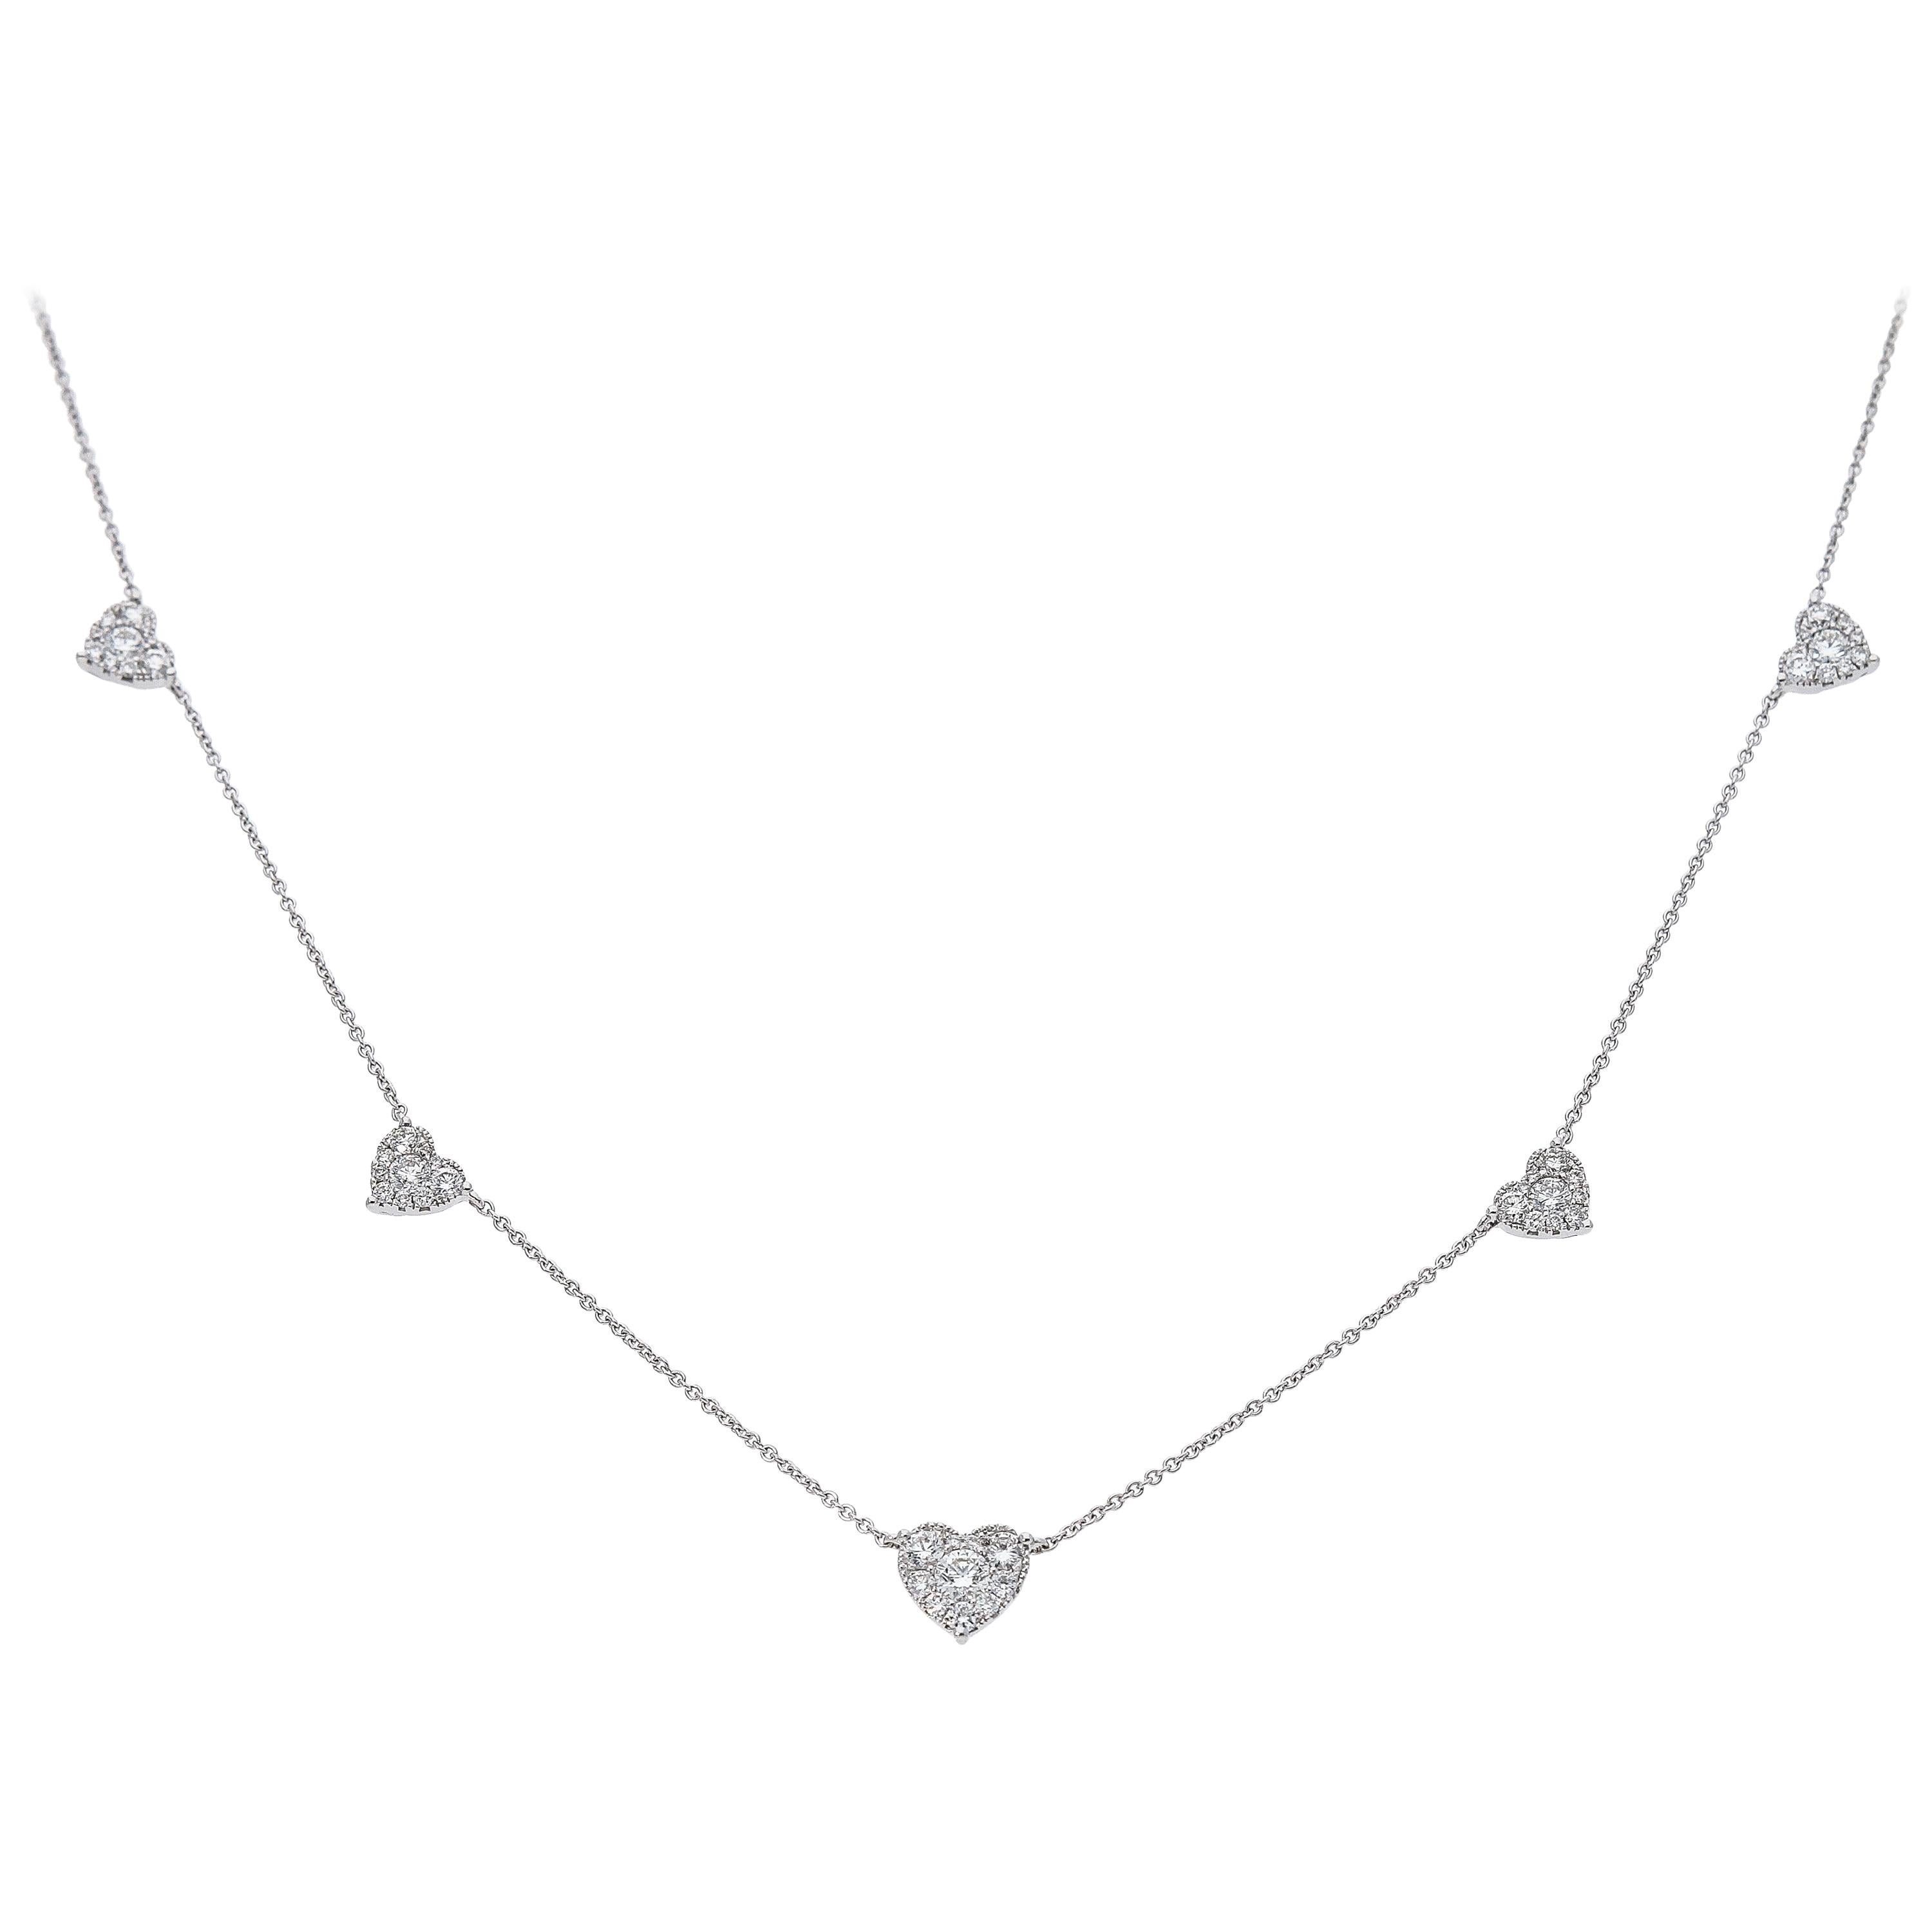 White Gold 18 Karat Chain Necklace with Five Heart Pendants with Diamonds